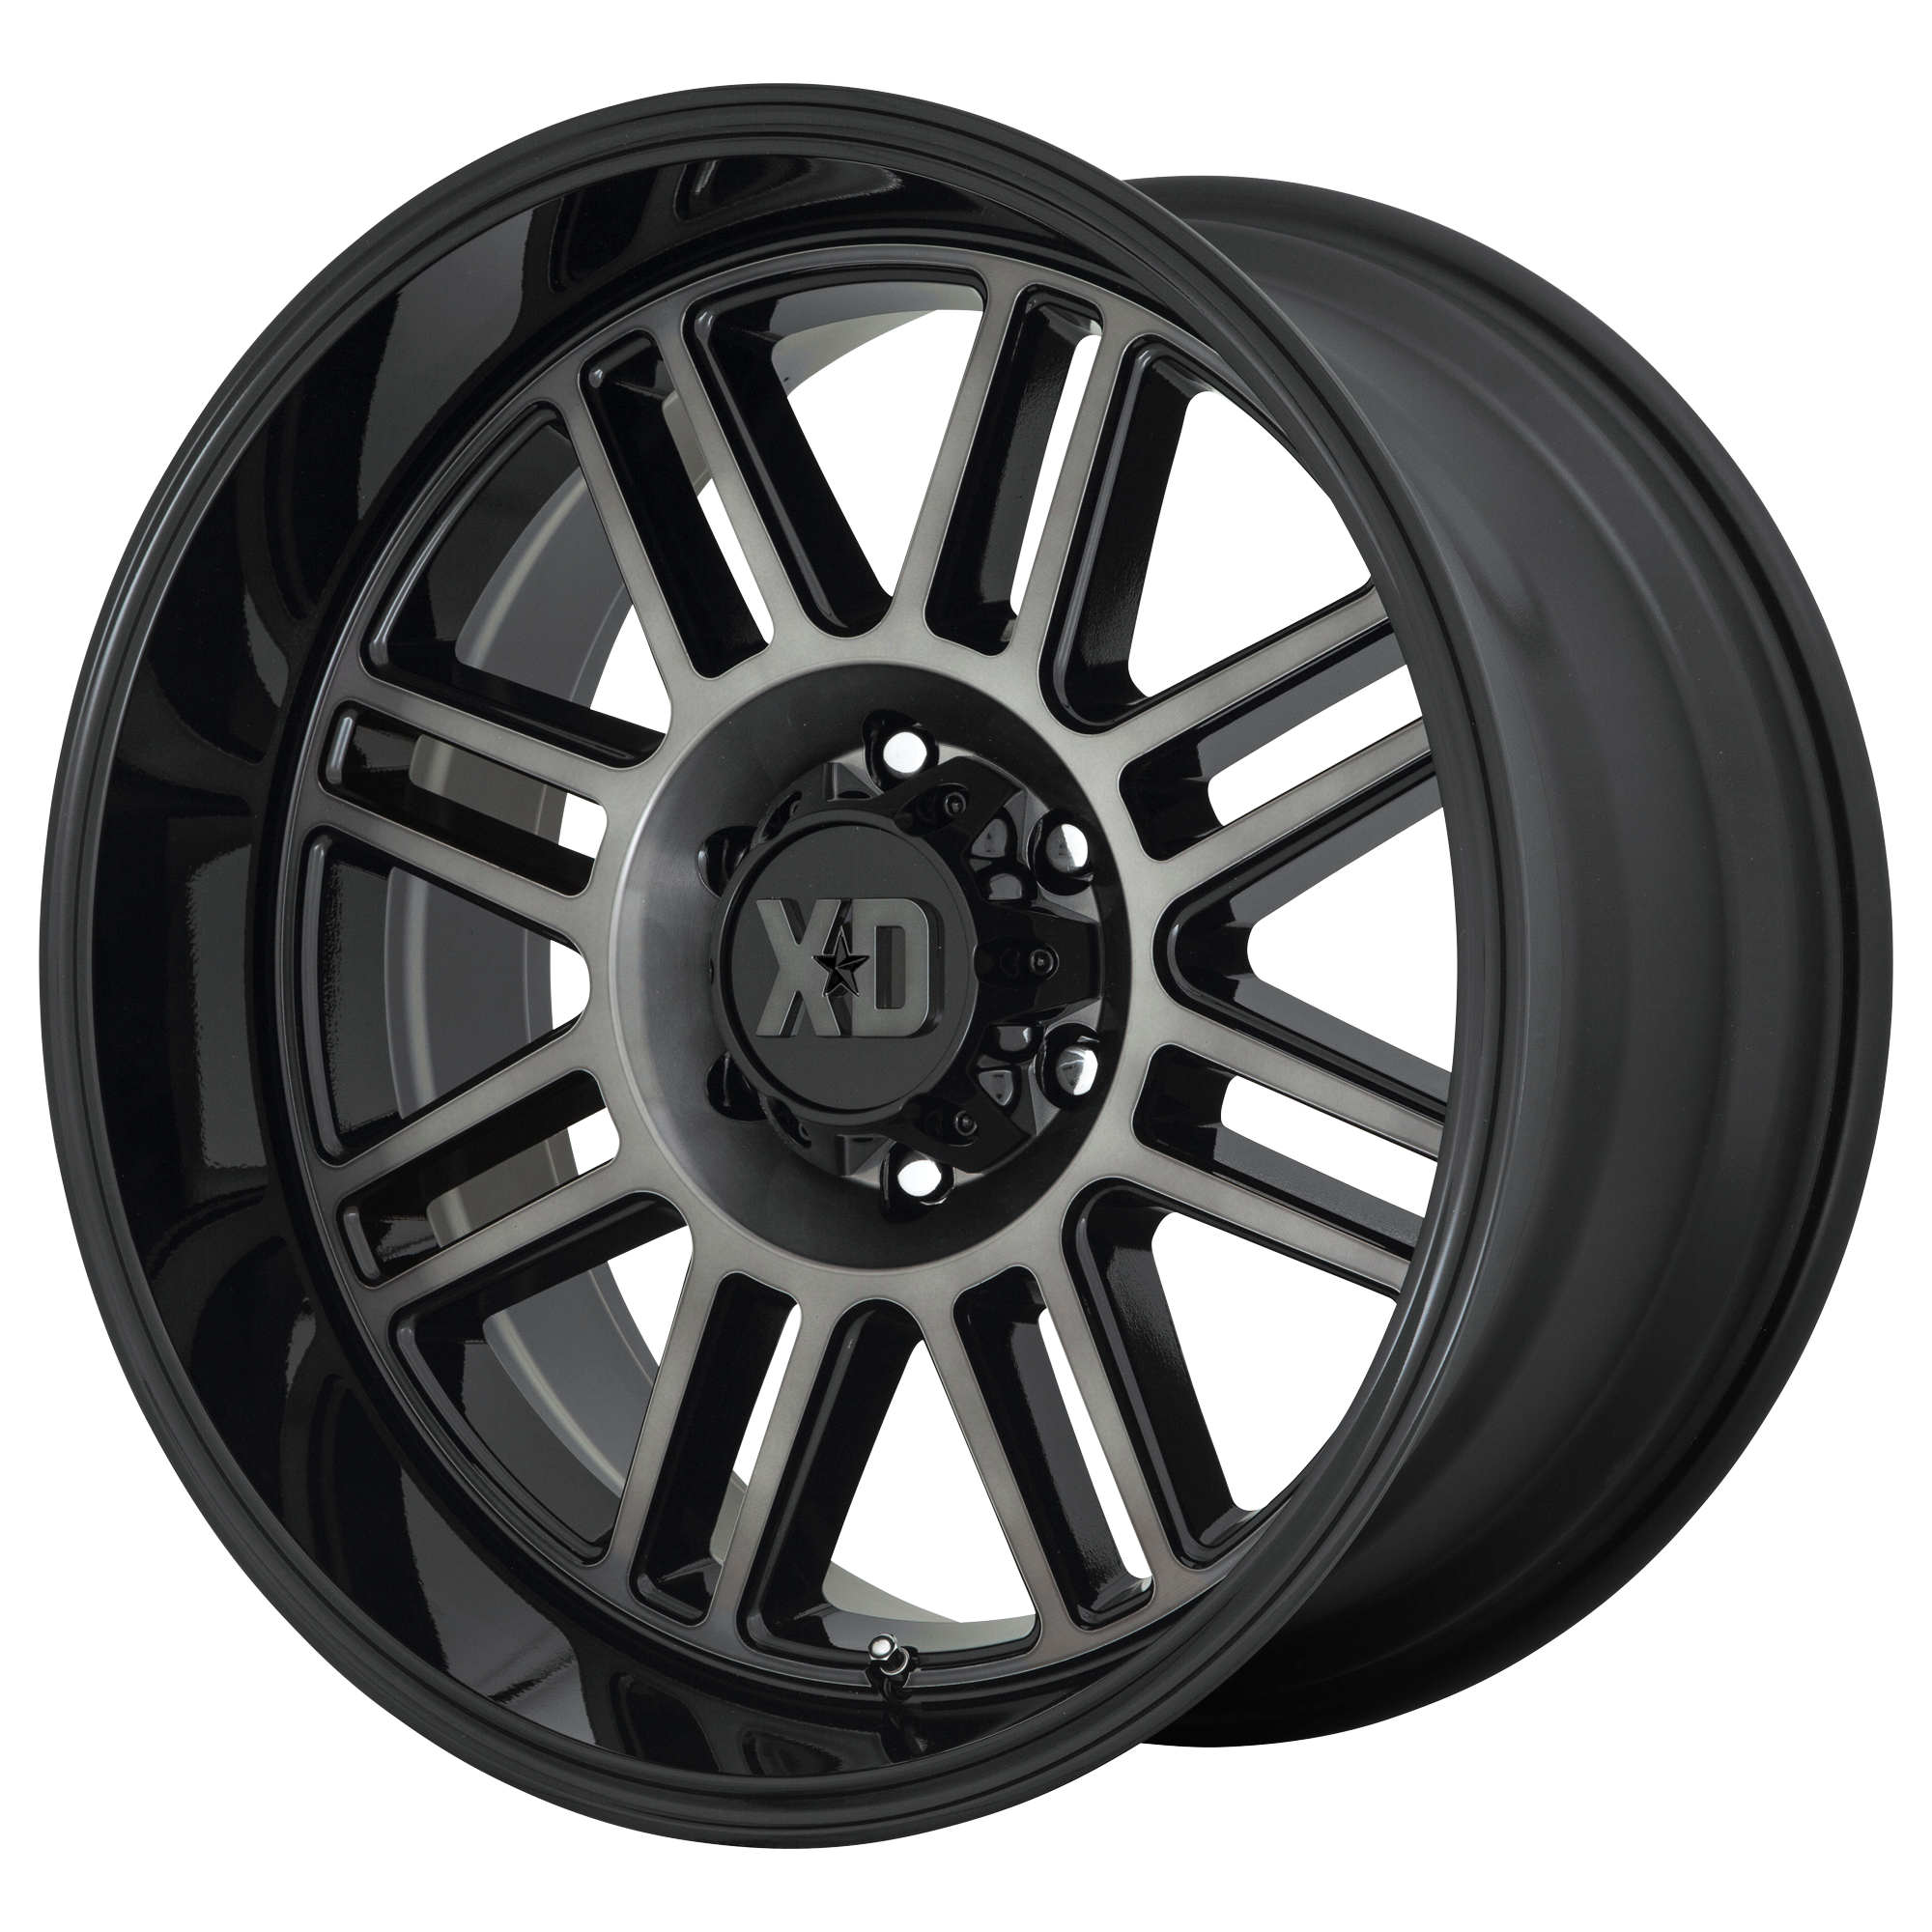 CAGE 22x10 5x127.00 GLOSS BLACK W/ GRAY TINT (-18 mm) - Tires and Engine Performance